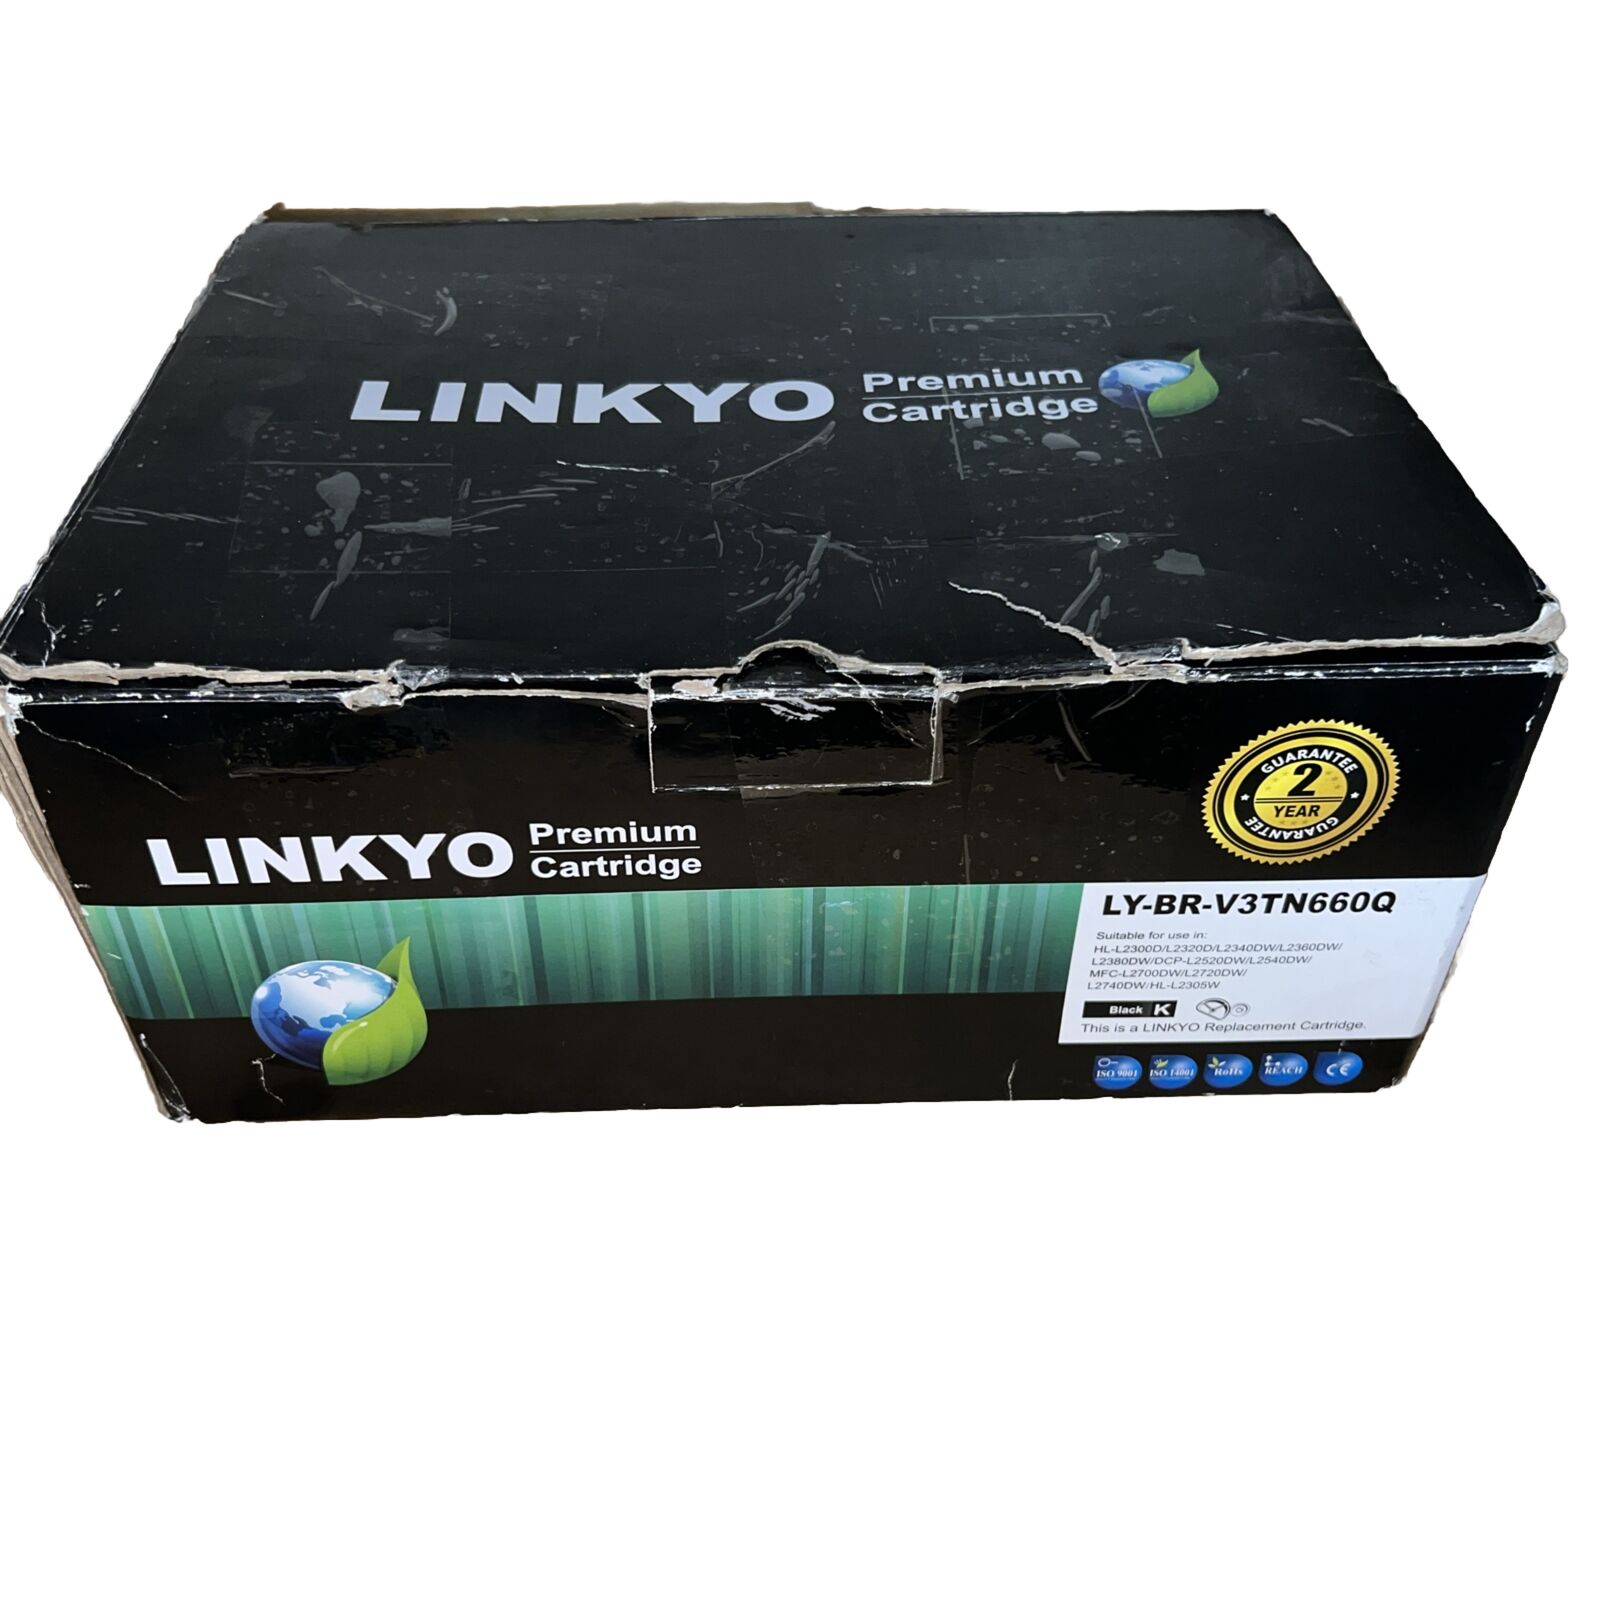 Linkyo Replacement Toner Cartridge LY-BR-V3TN660Q- 4 Pack - Brother Laser Toner